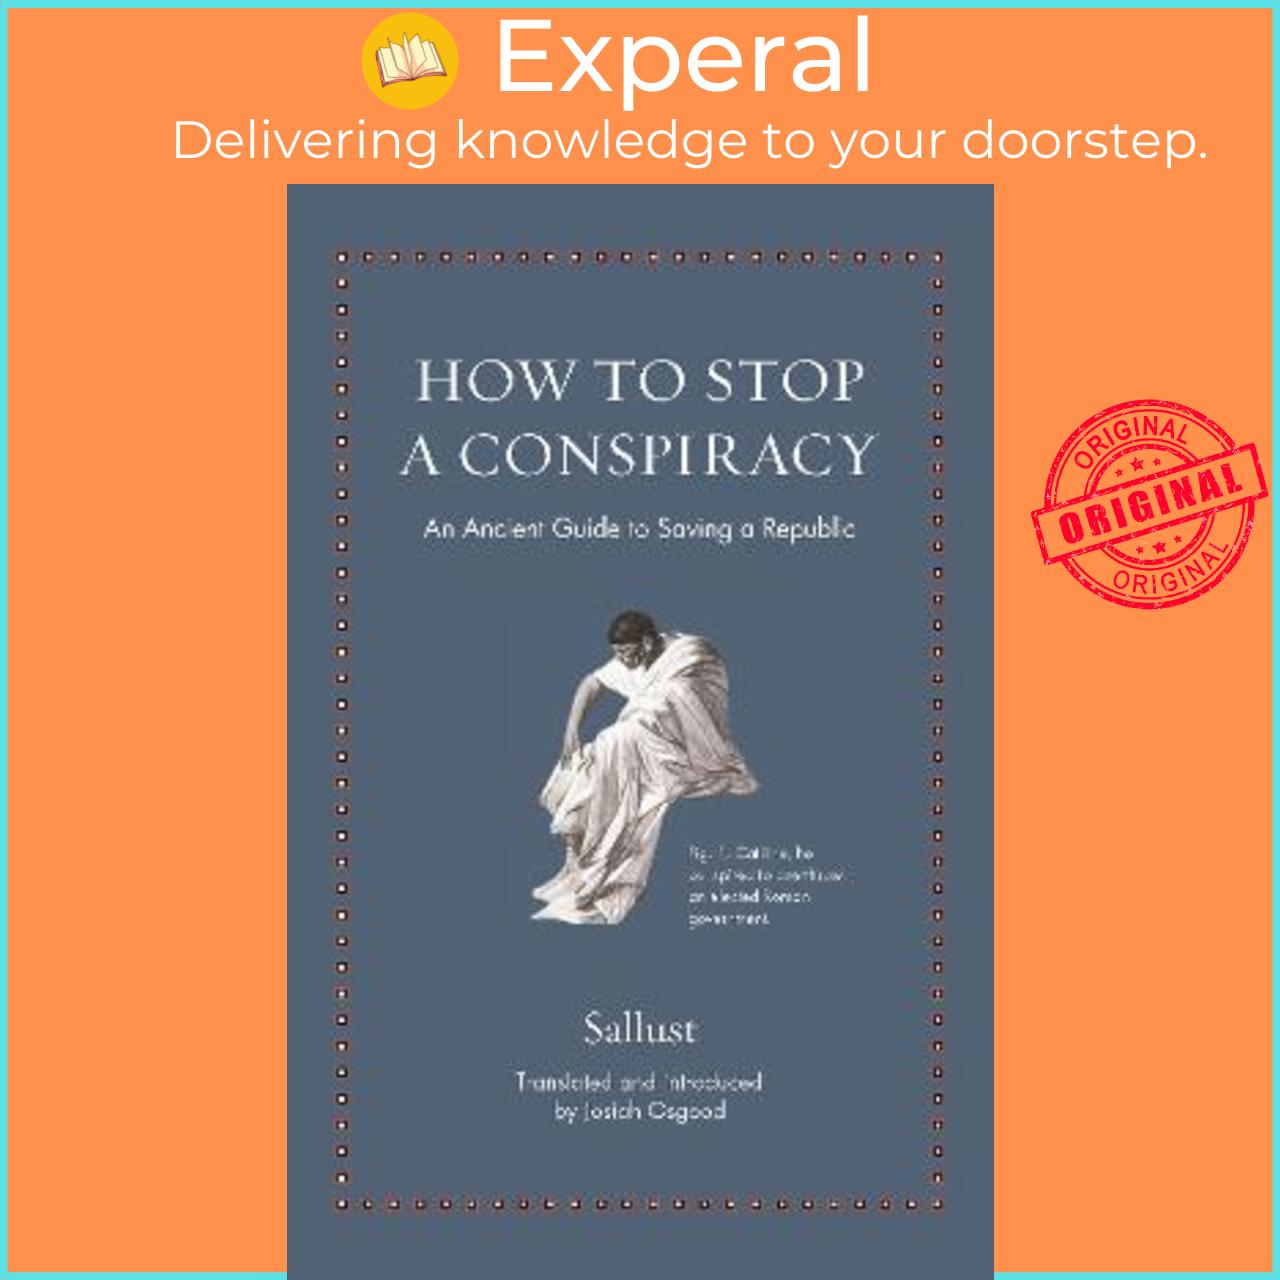 Sách - How to Stop a Conspiracy : An Ancient Guide to Saving a Republic by Sallust (US edition, hardcover)